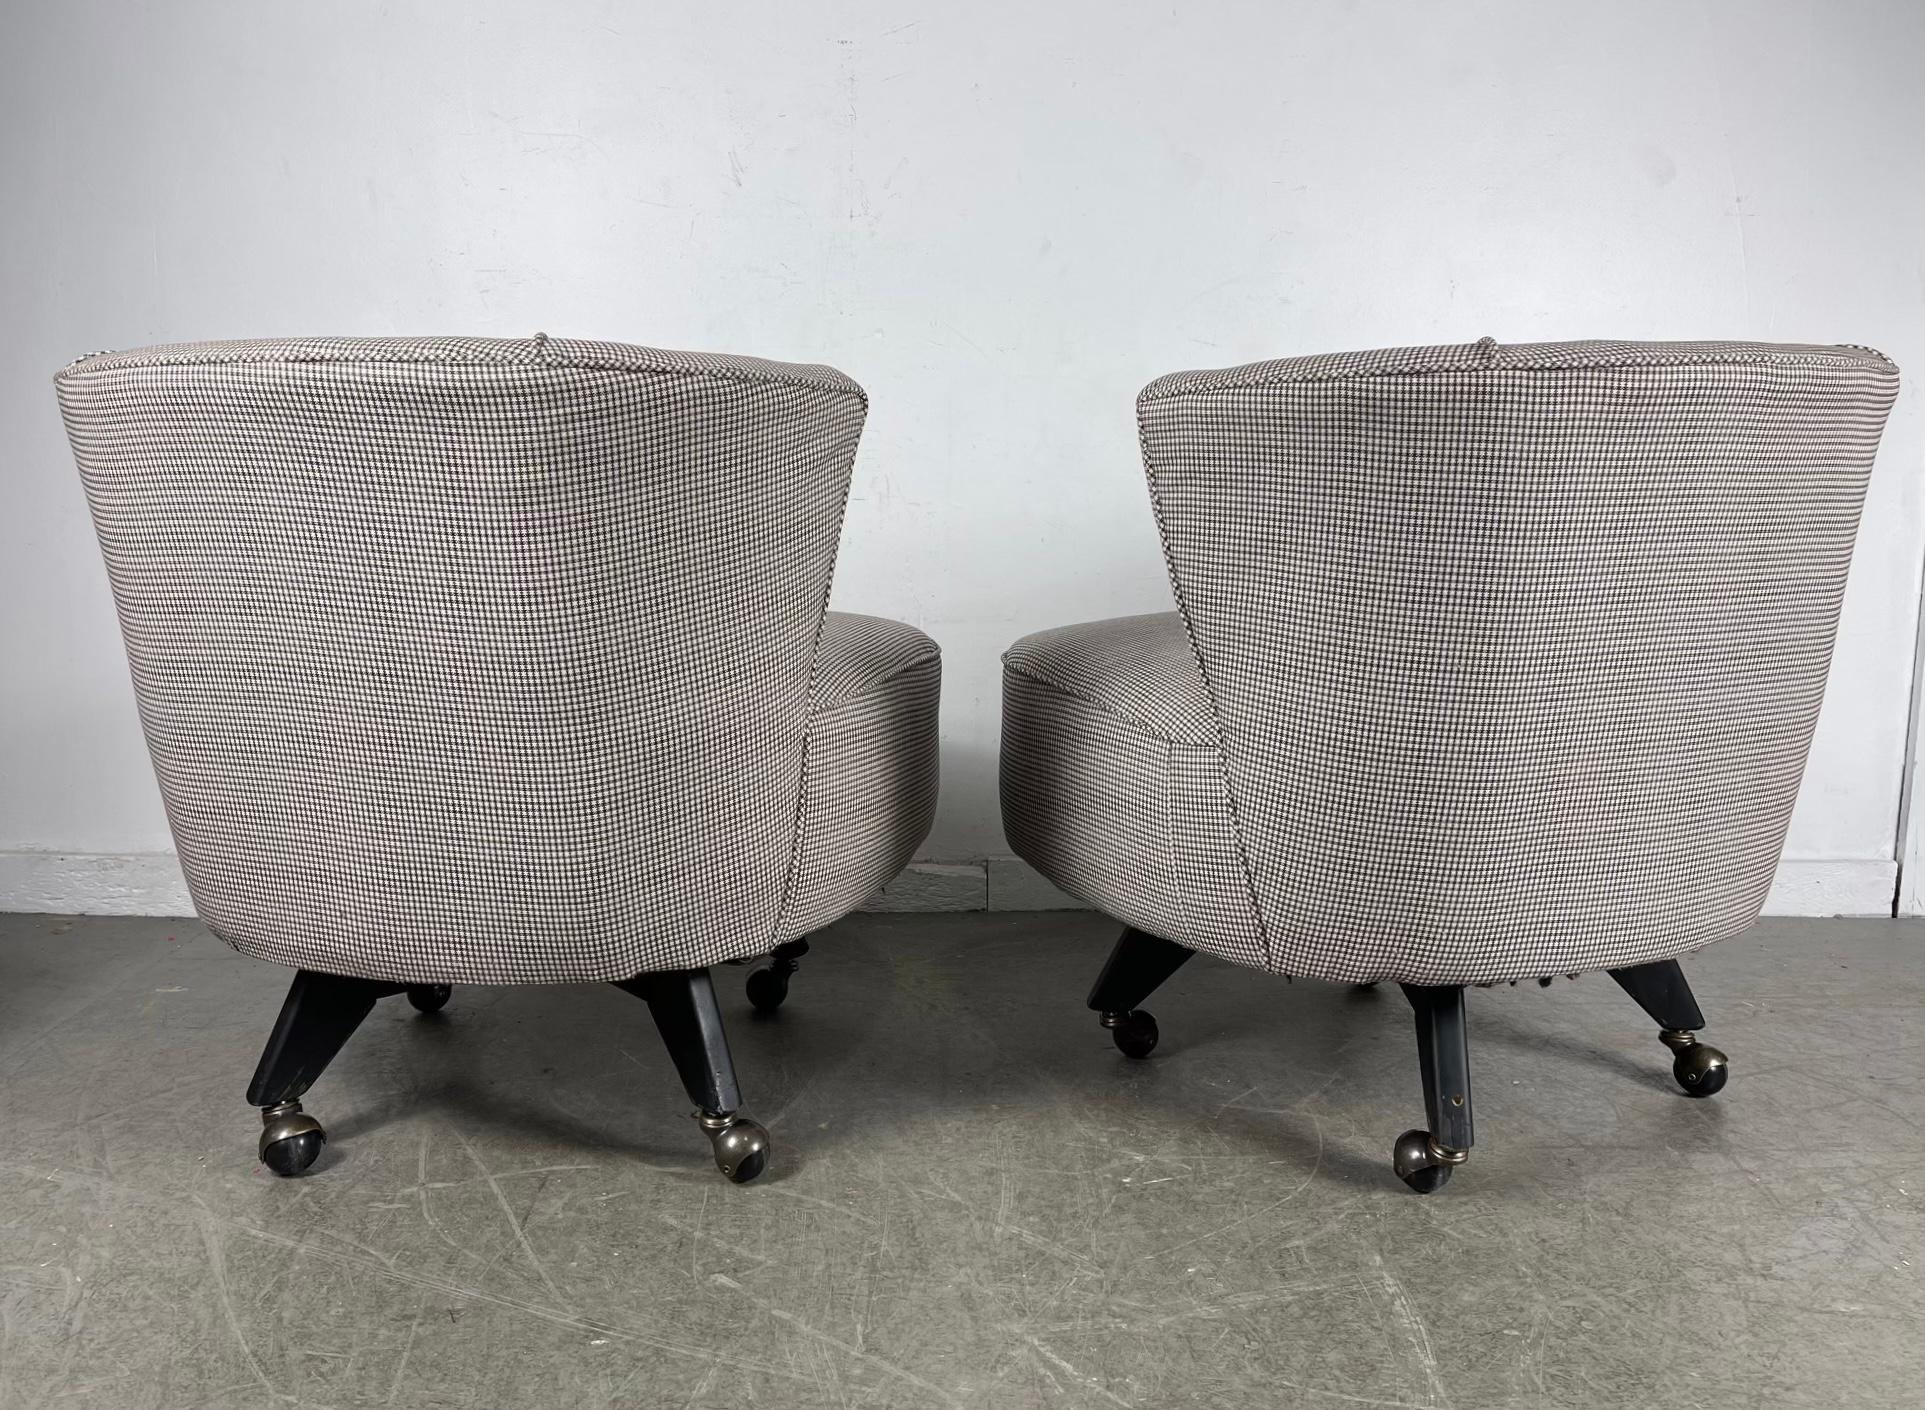 American Classic Pair Mid-Century Modern Swivel Chairs on castors, , attrib to Selig For Sale